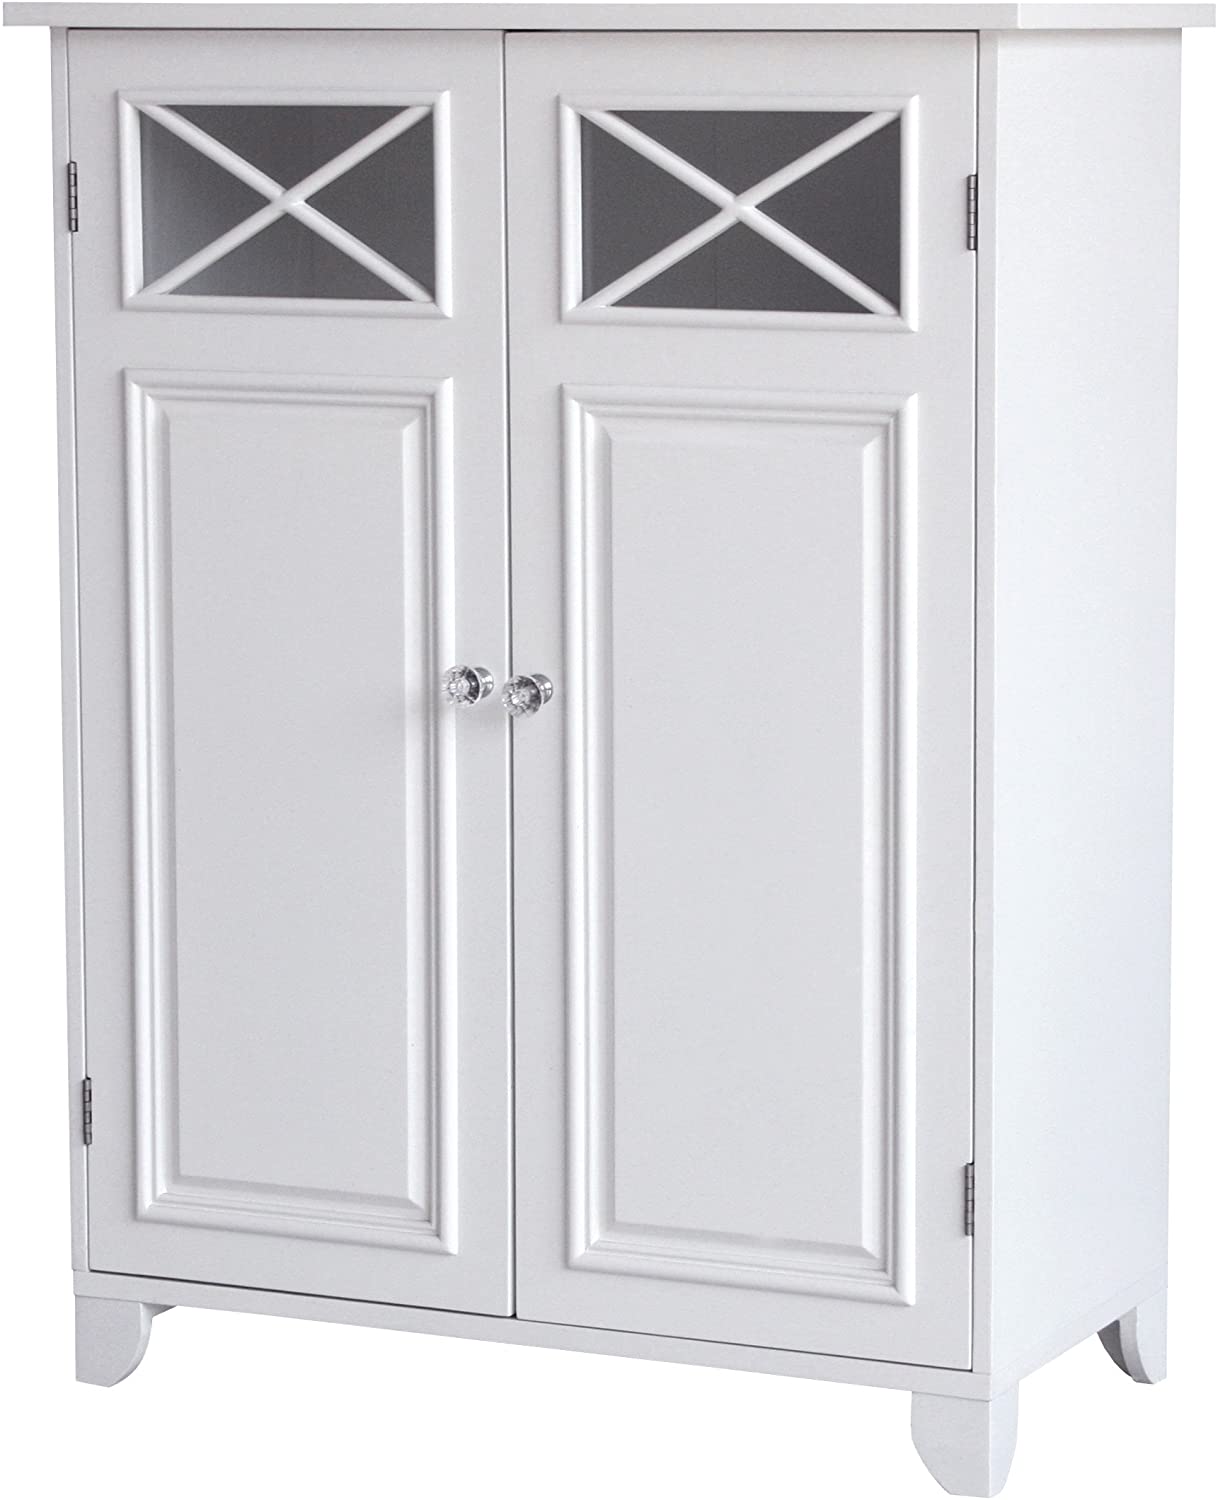 Teamson Home Dawson Wooden Floor Cabinet with Cross Molding and 2 Doors, White - image 1 of 9